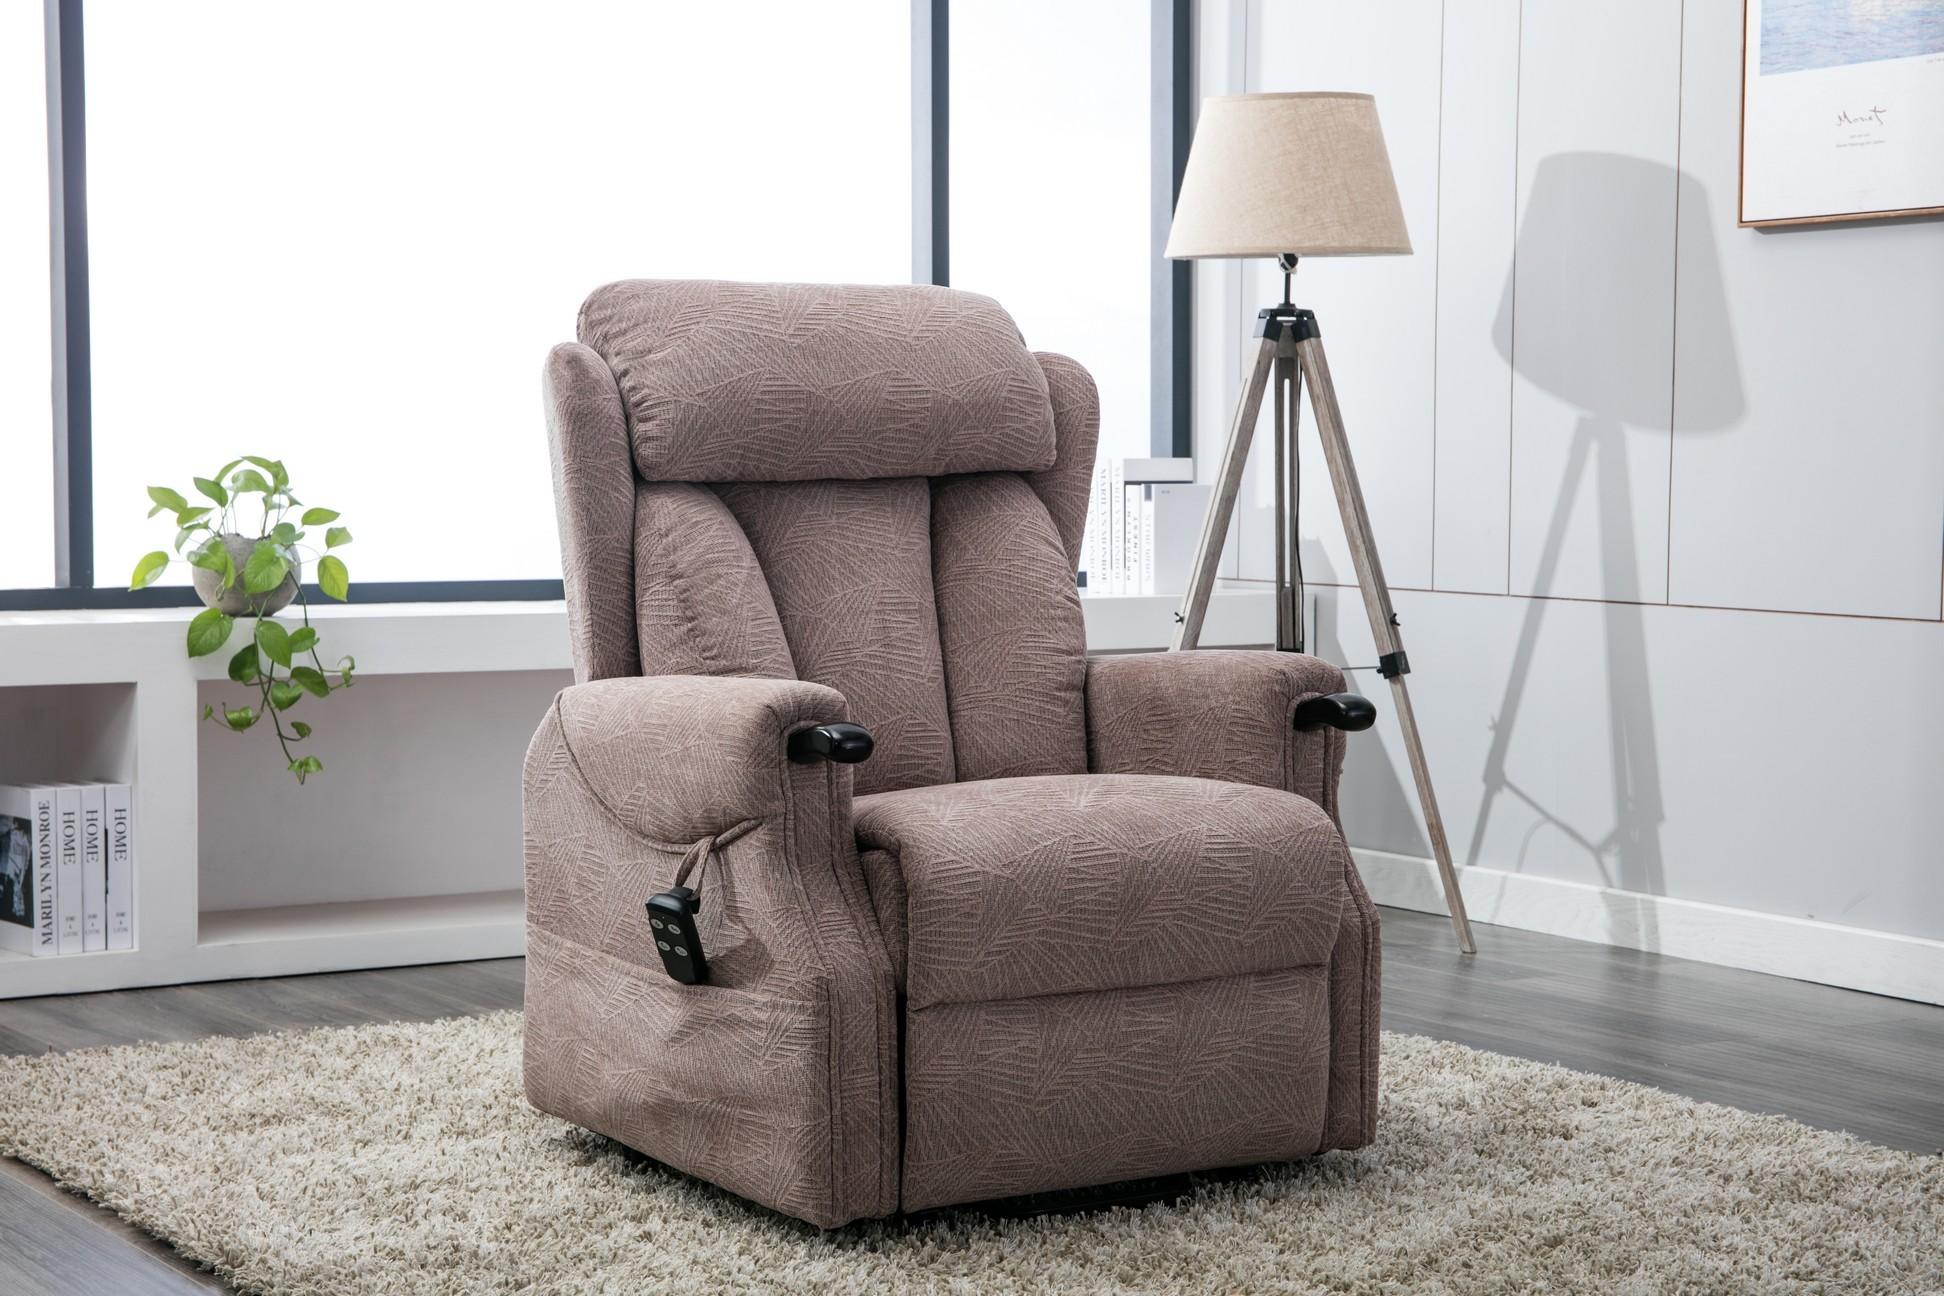 Denmark Recliner Available in our Thanet Showroom